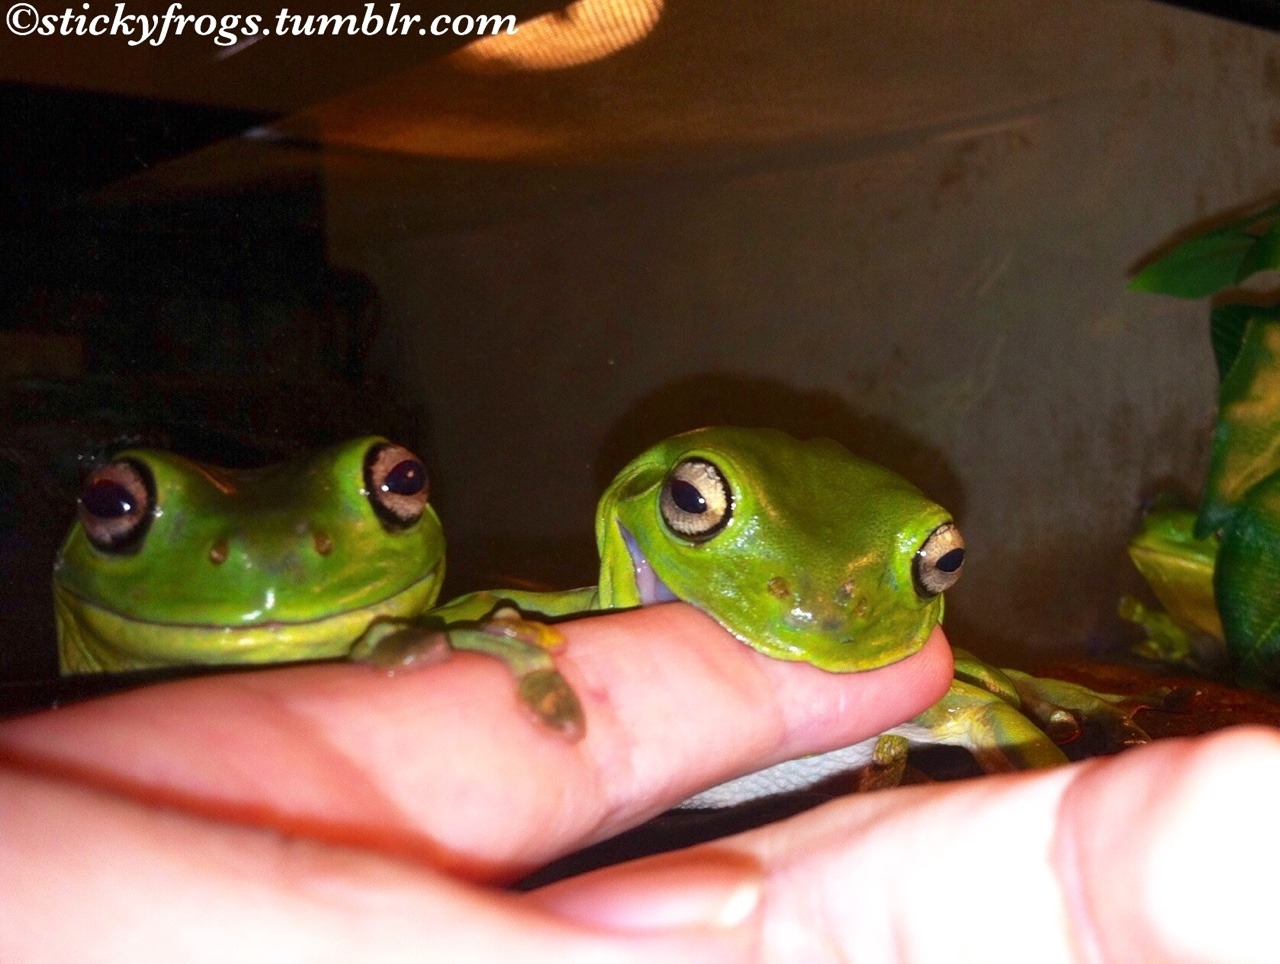 stickyfrogs:  A Naughty Friend, her Accomplice, and a Lurker! 